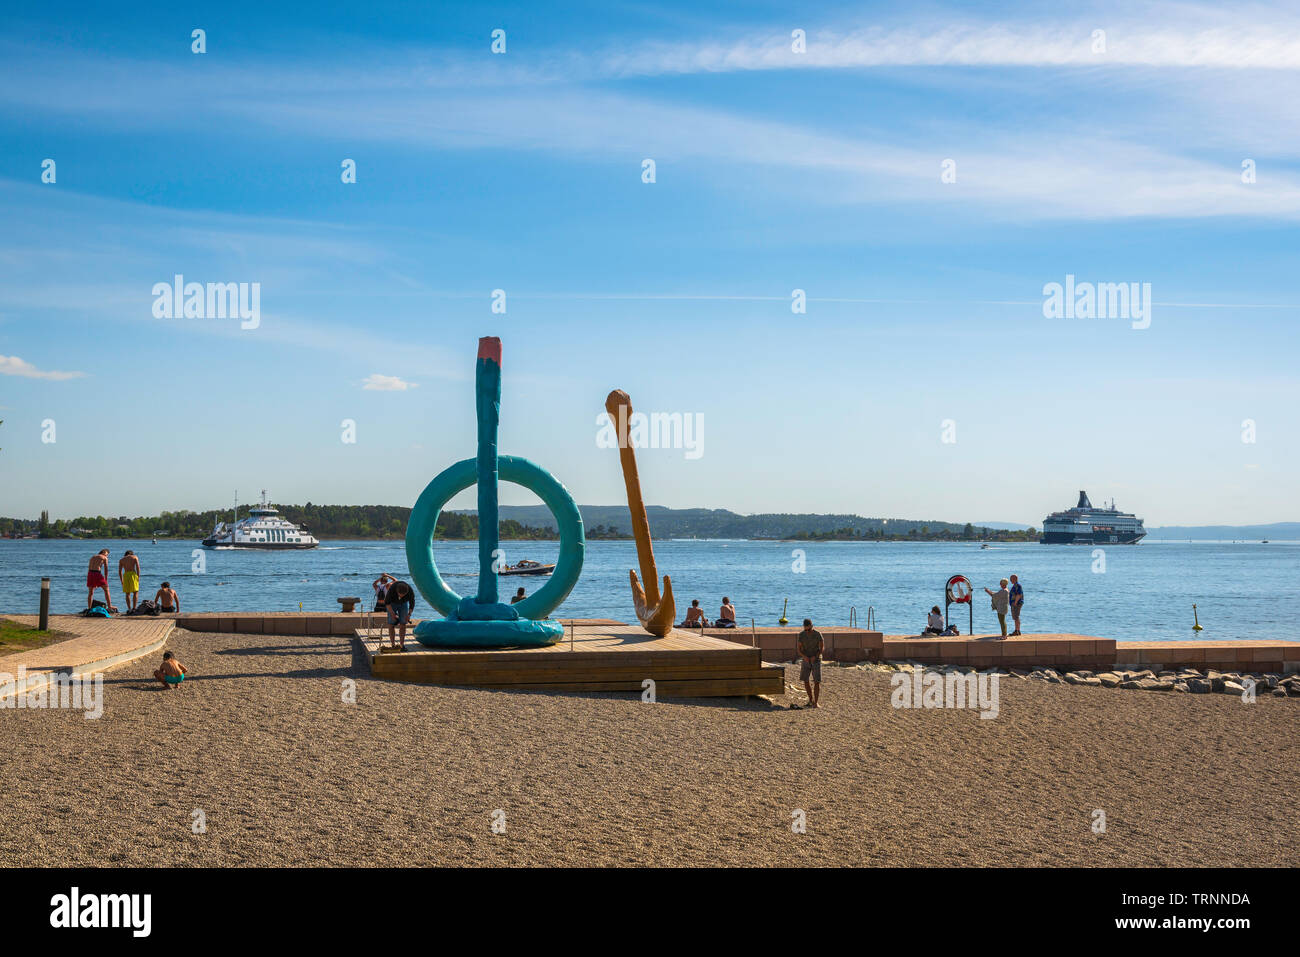 Oslo beach, view in summer of Tjuvholmen City Beach in the harbour area of Oslo, Norway. Stock Photo